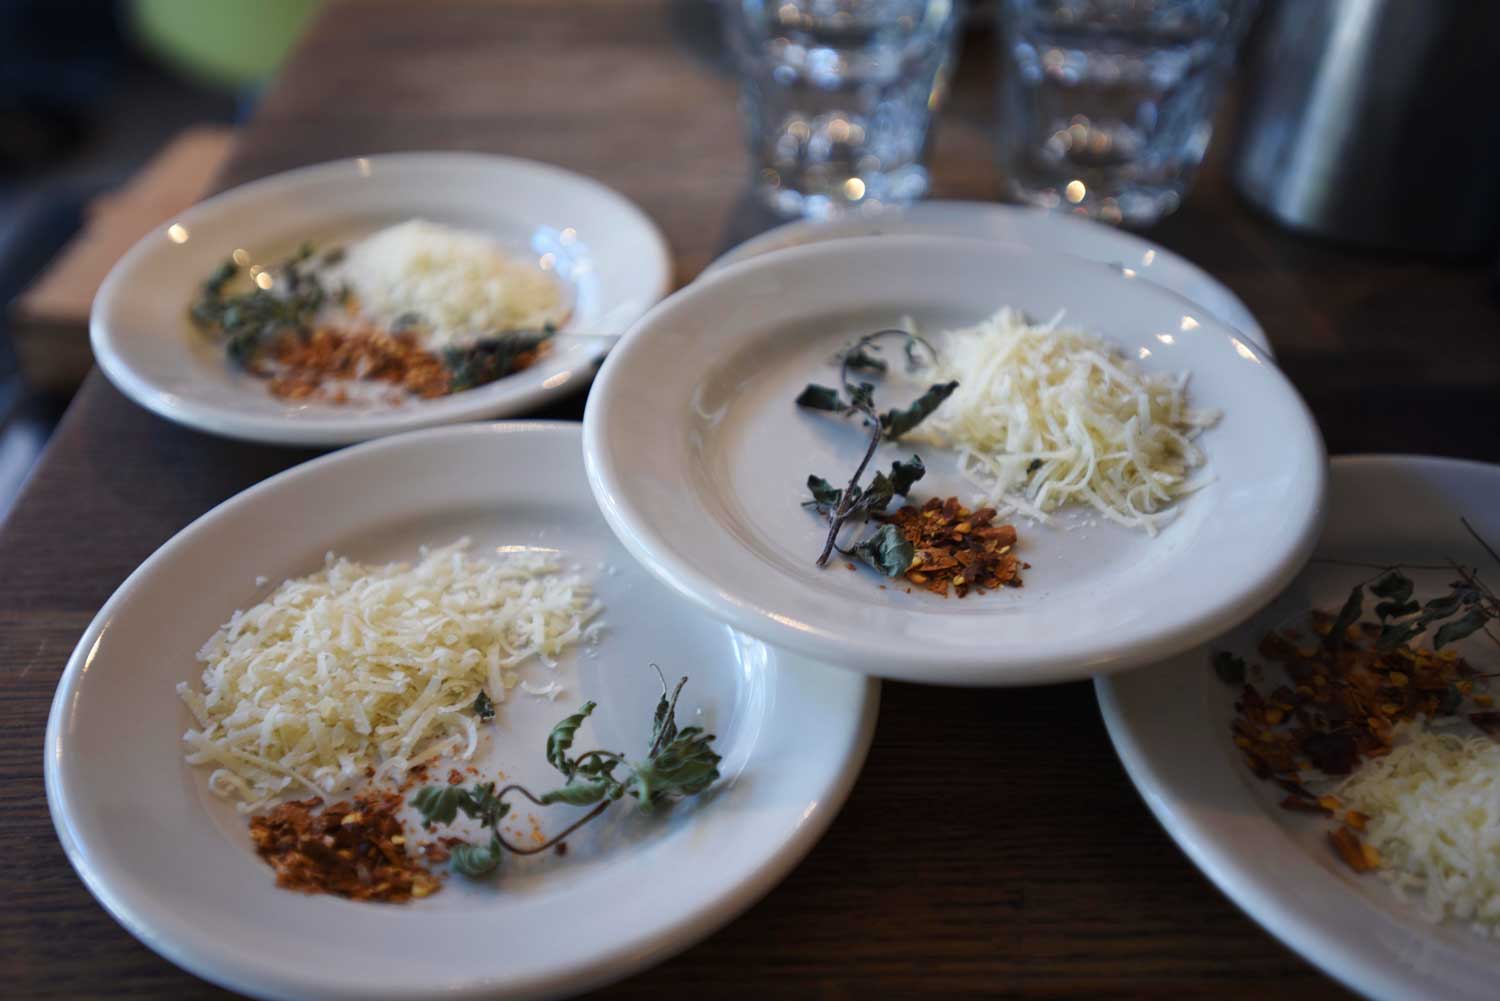 Parmesan, dried basil, and dried hot pepper garnishes wait to be served with pizzas at Pizzeria Delfina